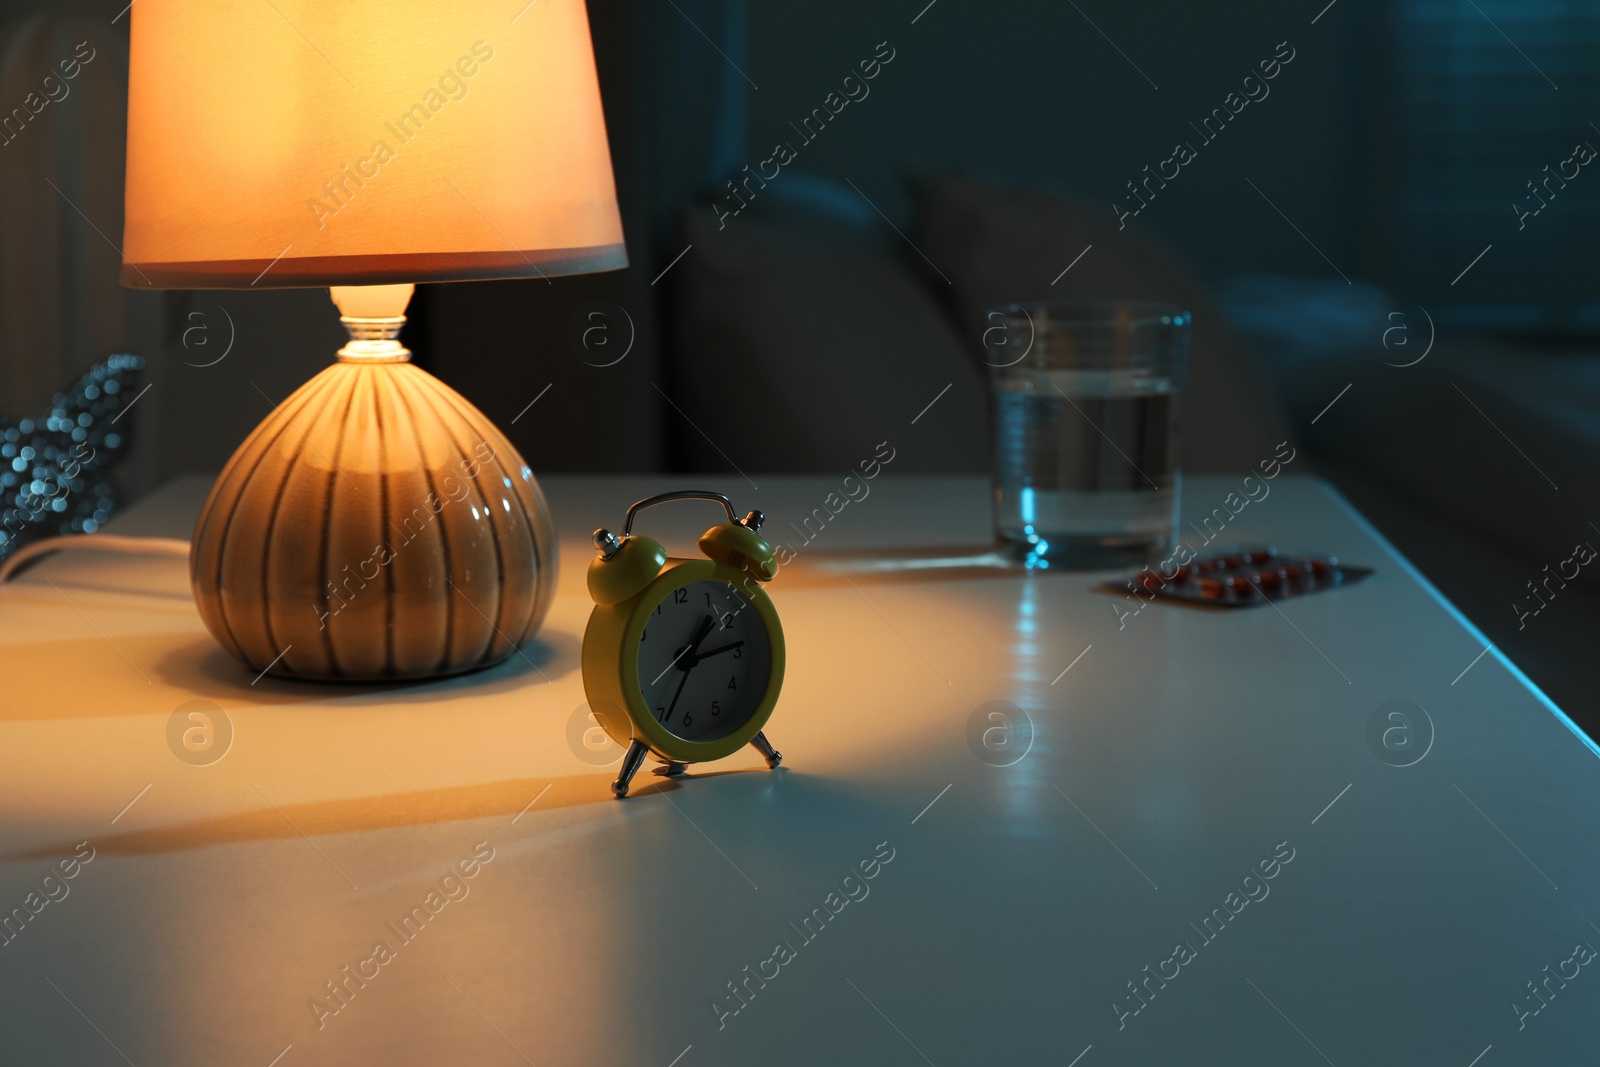 Photo of Insomnia treatment. Glass of water, pills and alarm clock on bedside table in bedroom at night, selective focus